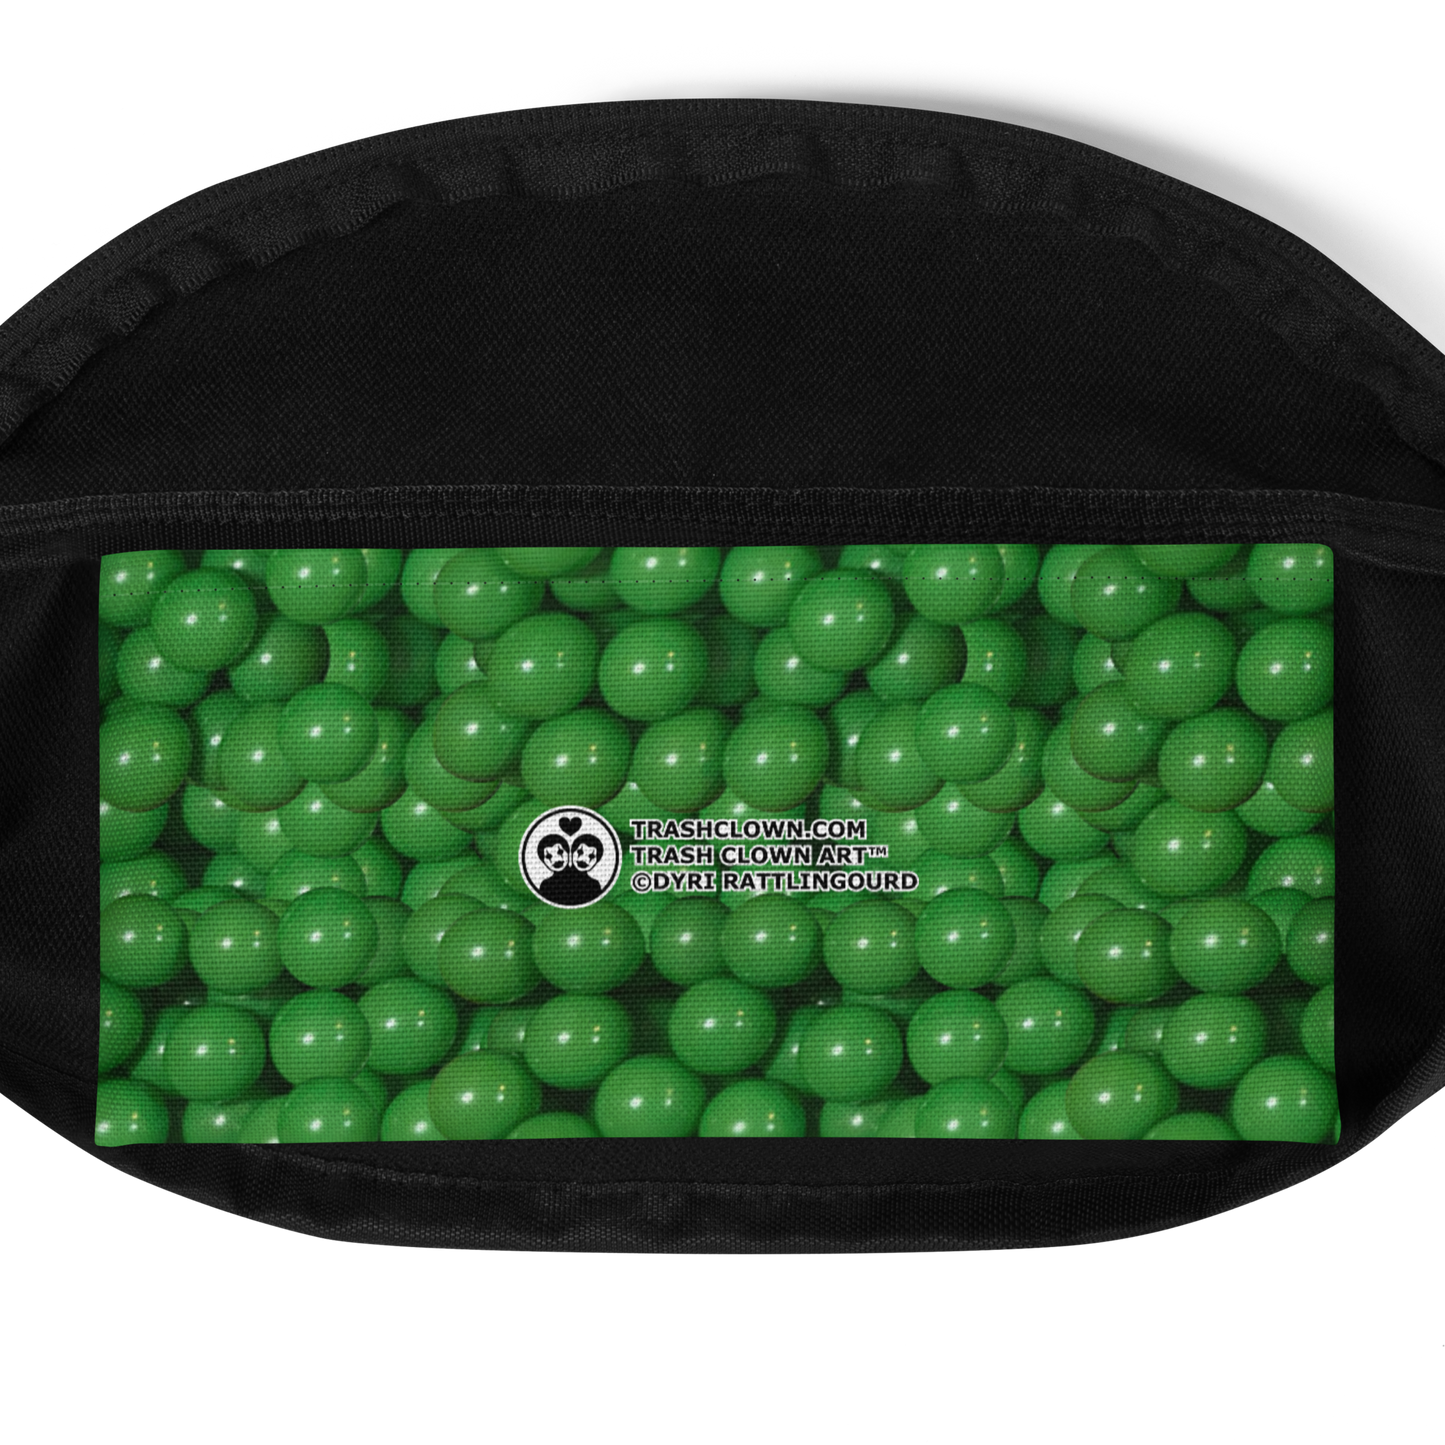 Ball Pit in Green Fanny Pack